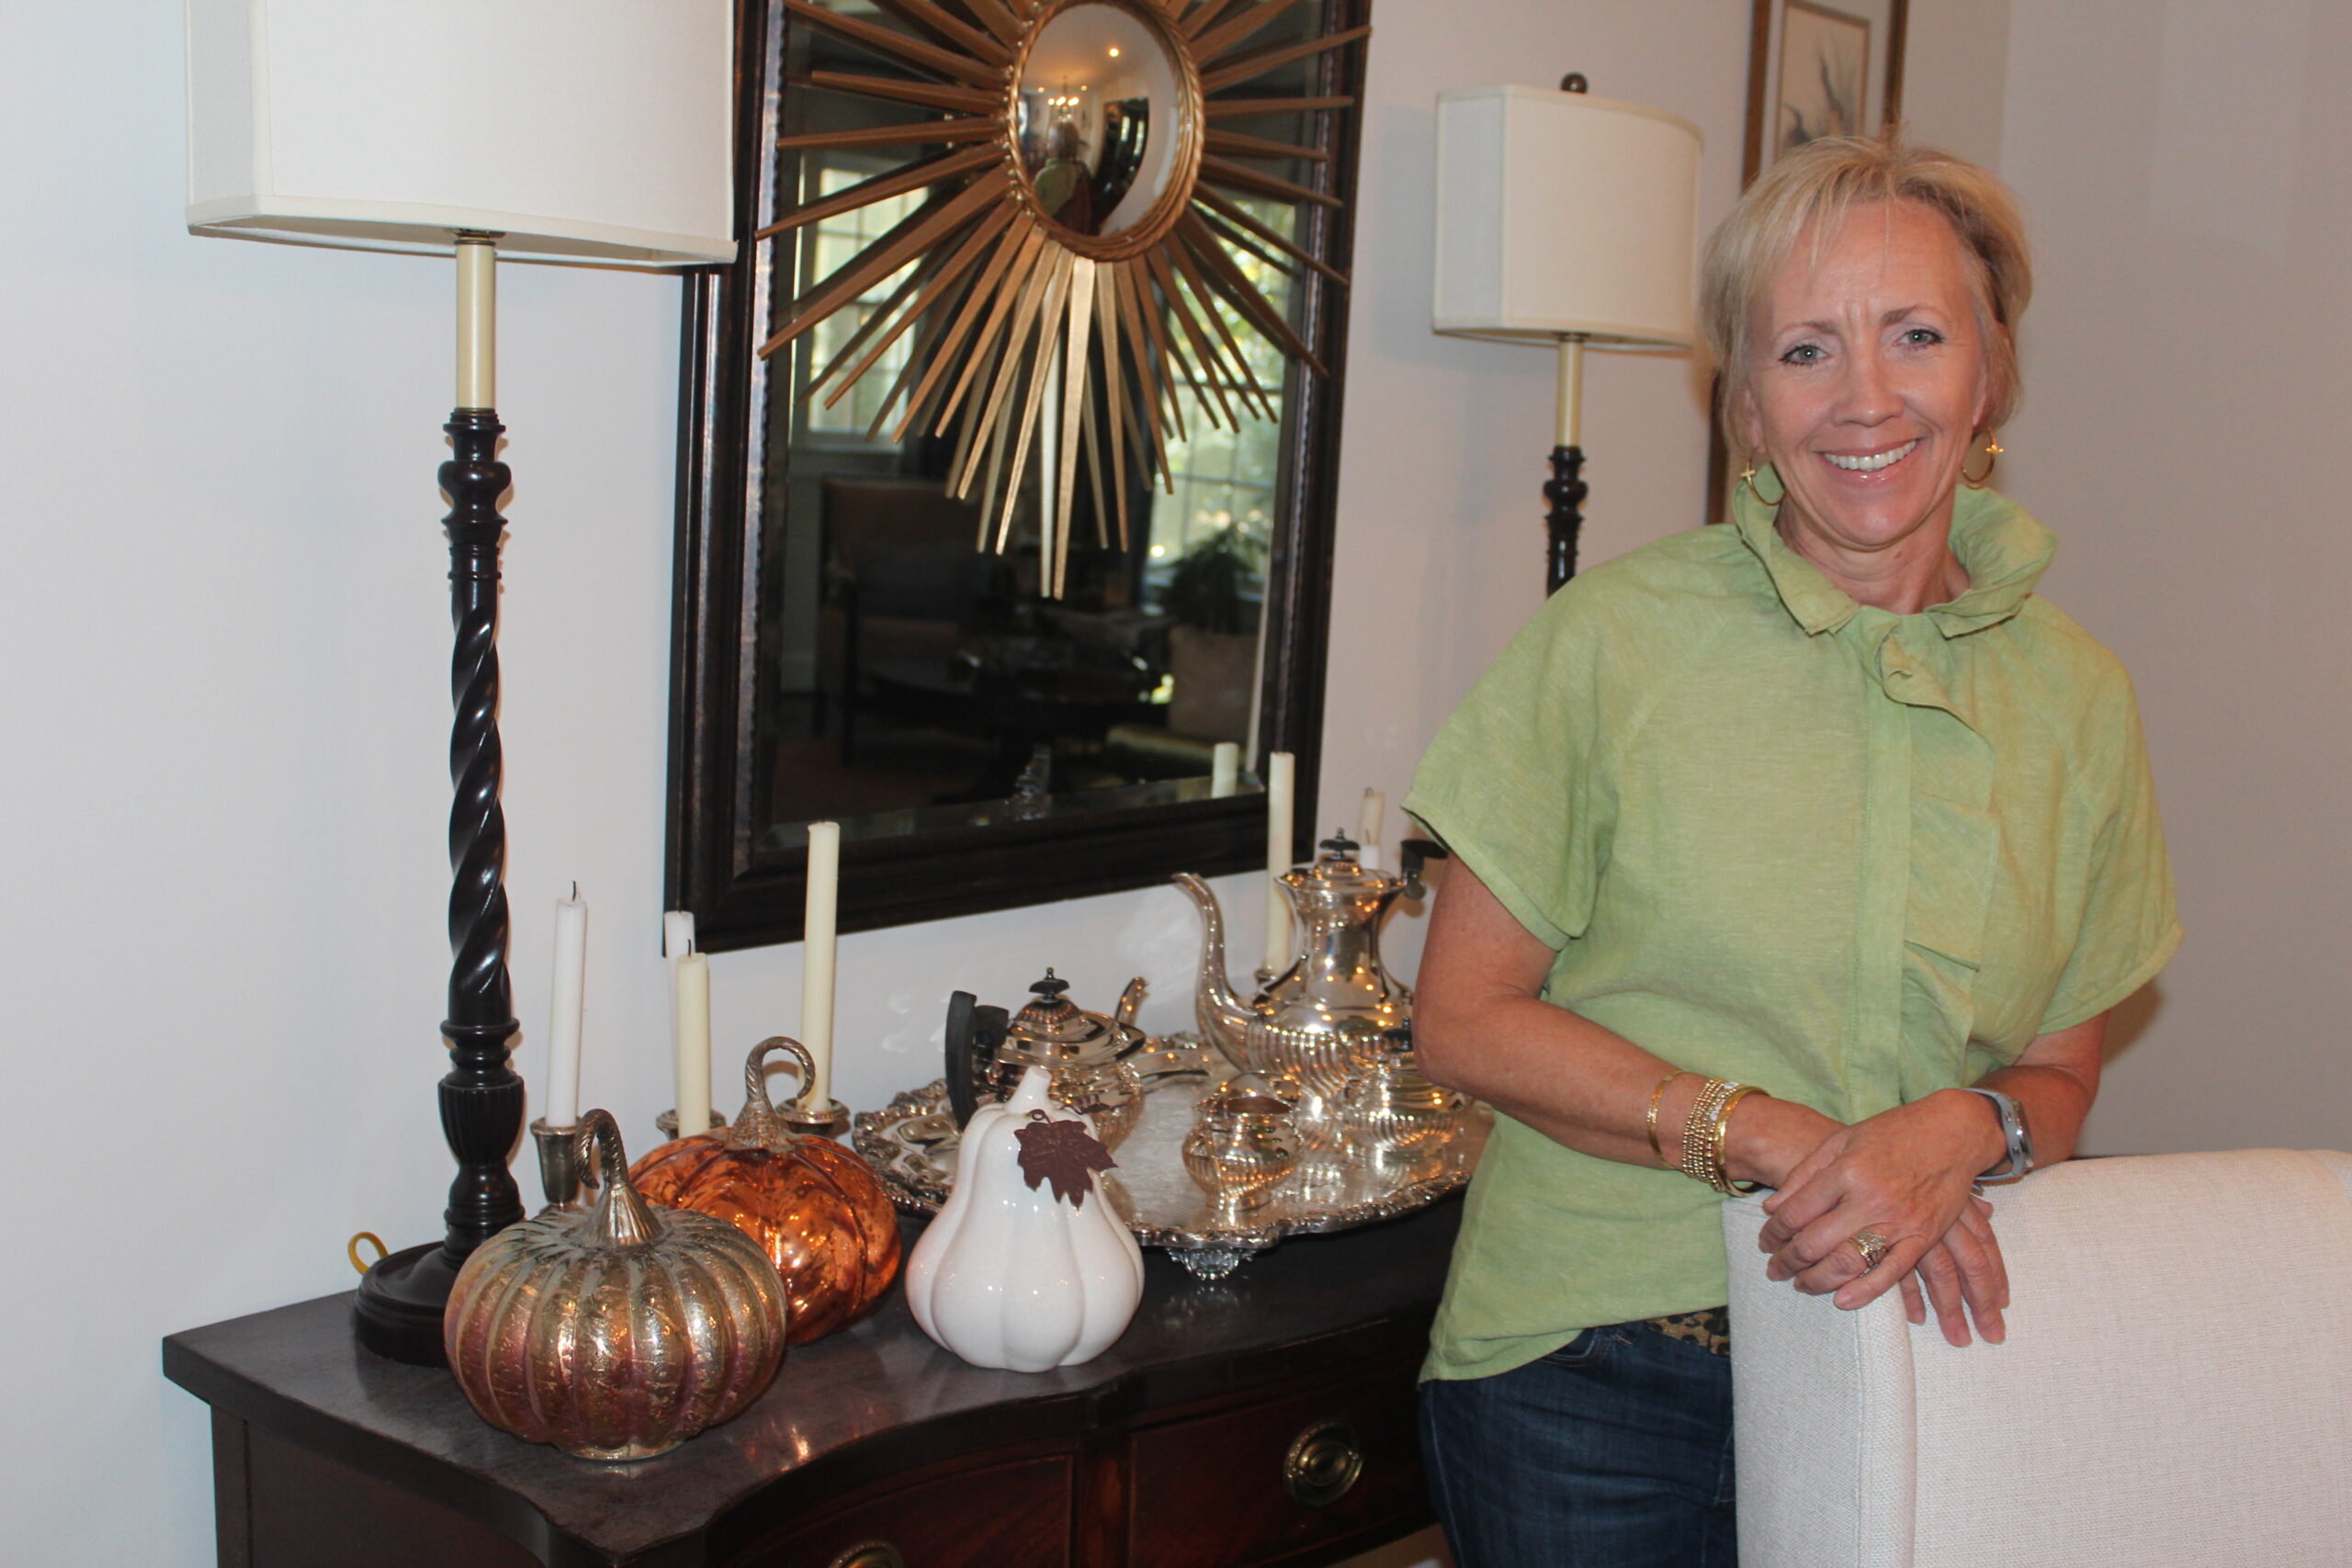 Southern Hospitality: Mary Ann Godwin creates family memories during Thanksgiving